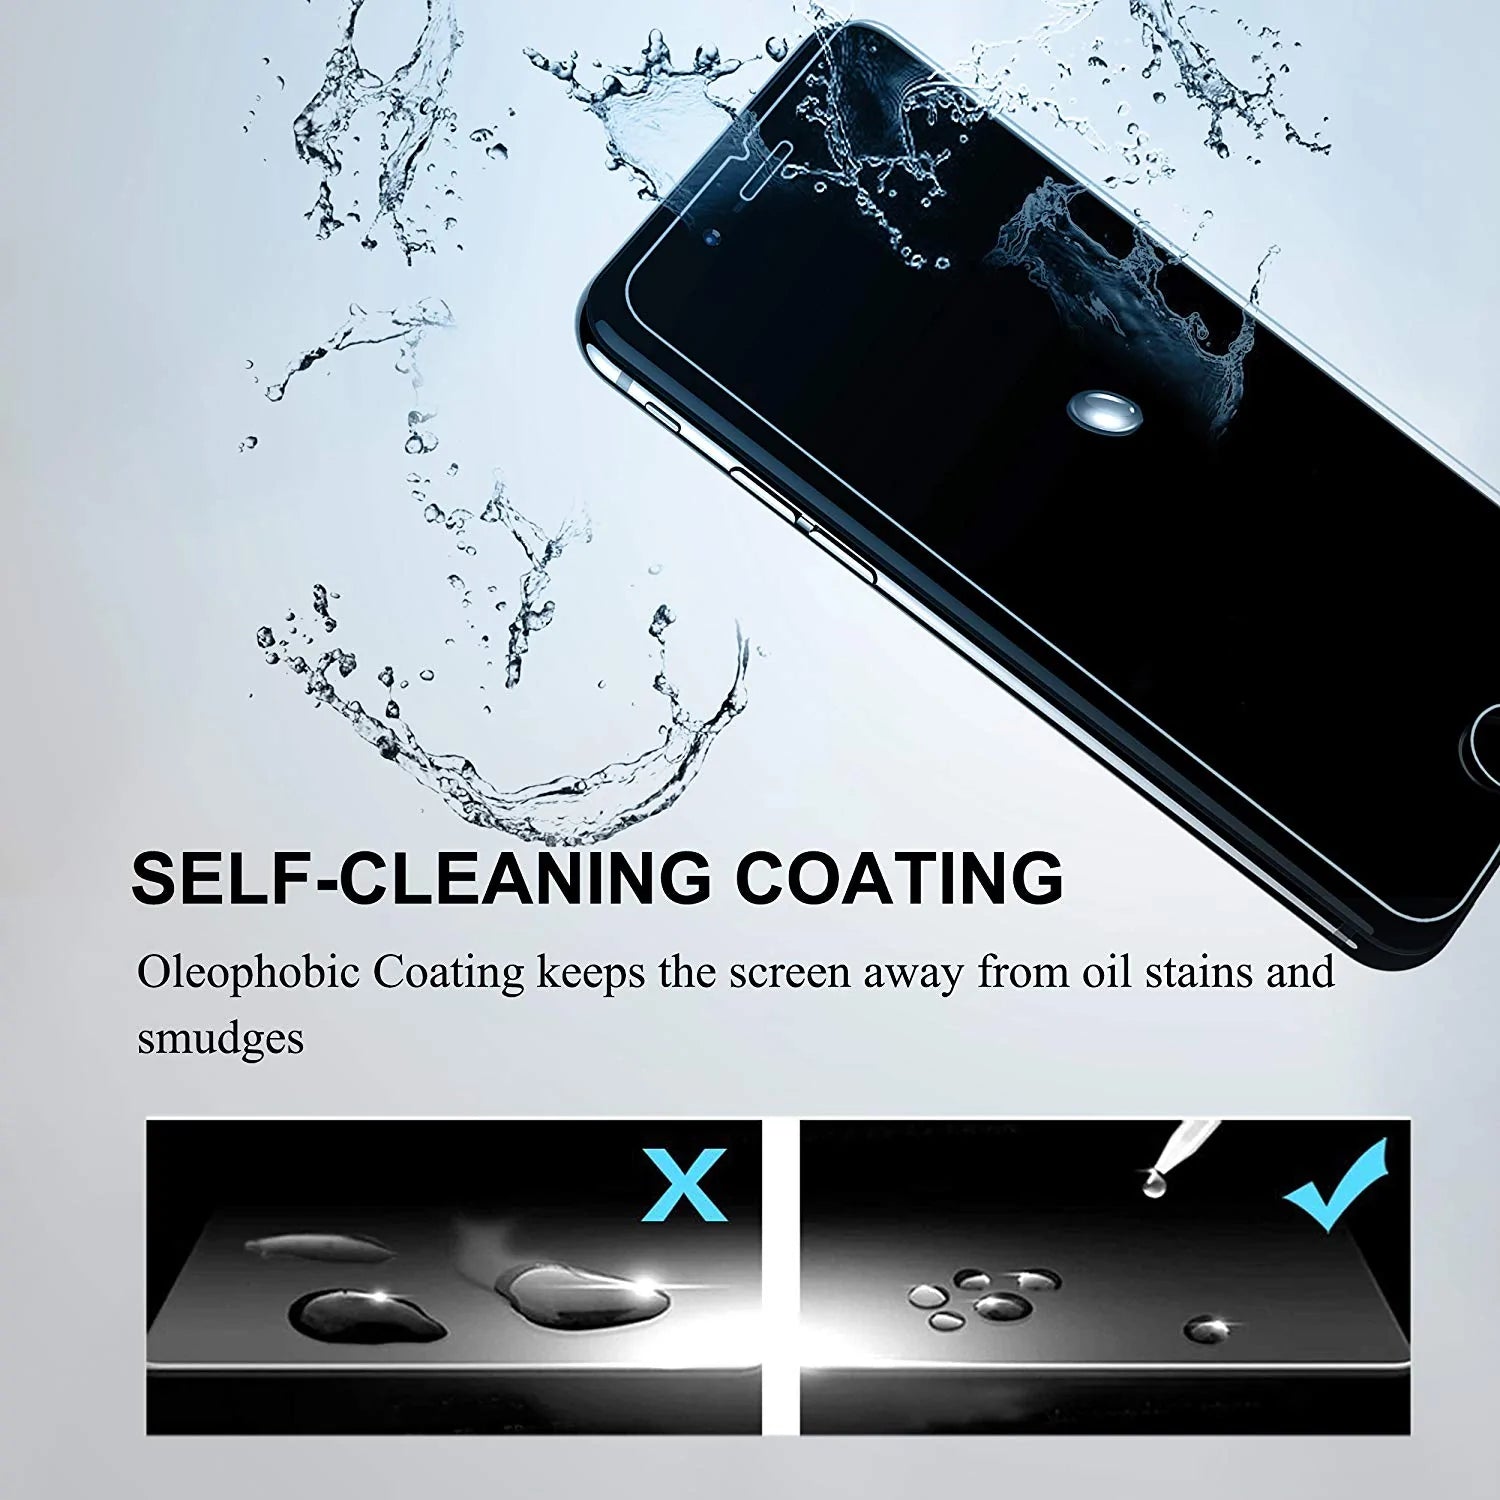 Glass A+++ Stealth Armor Screen Protector